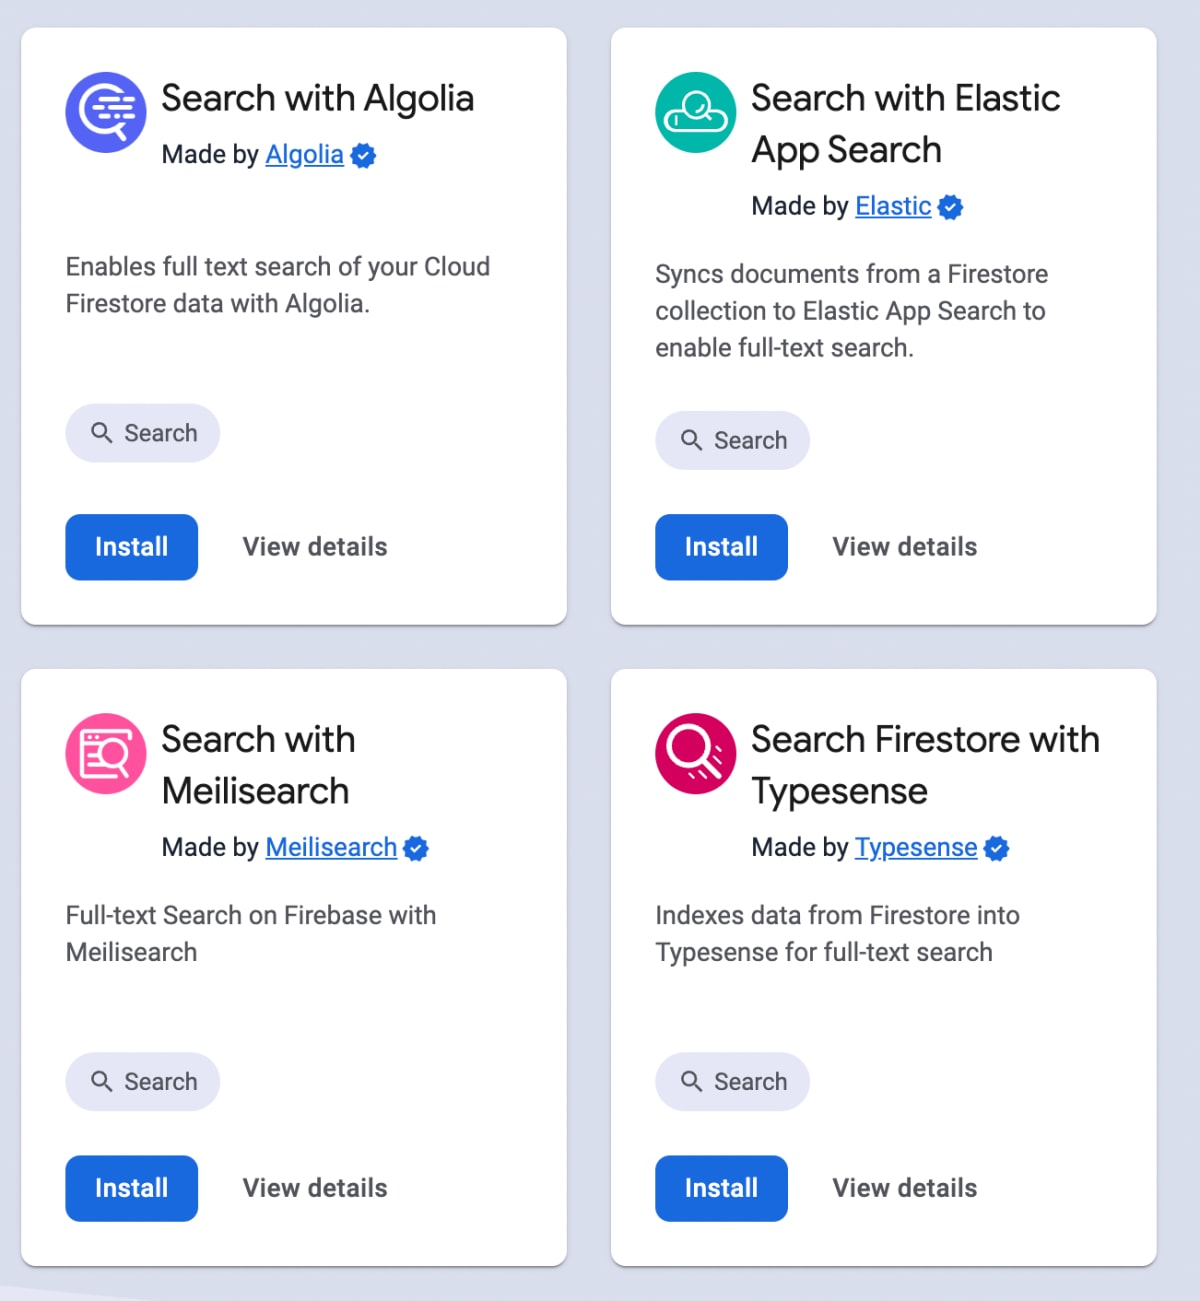 Search with Elastic App Search